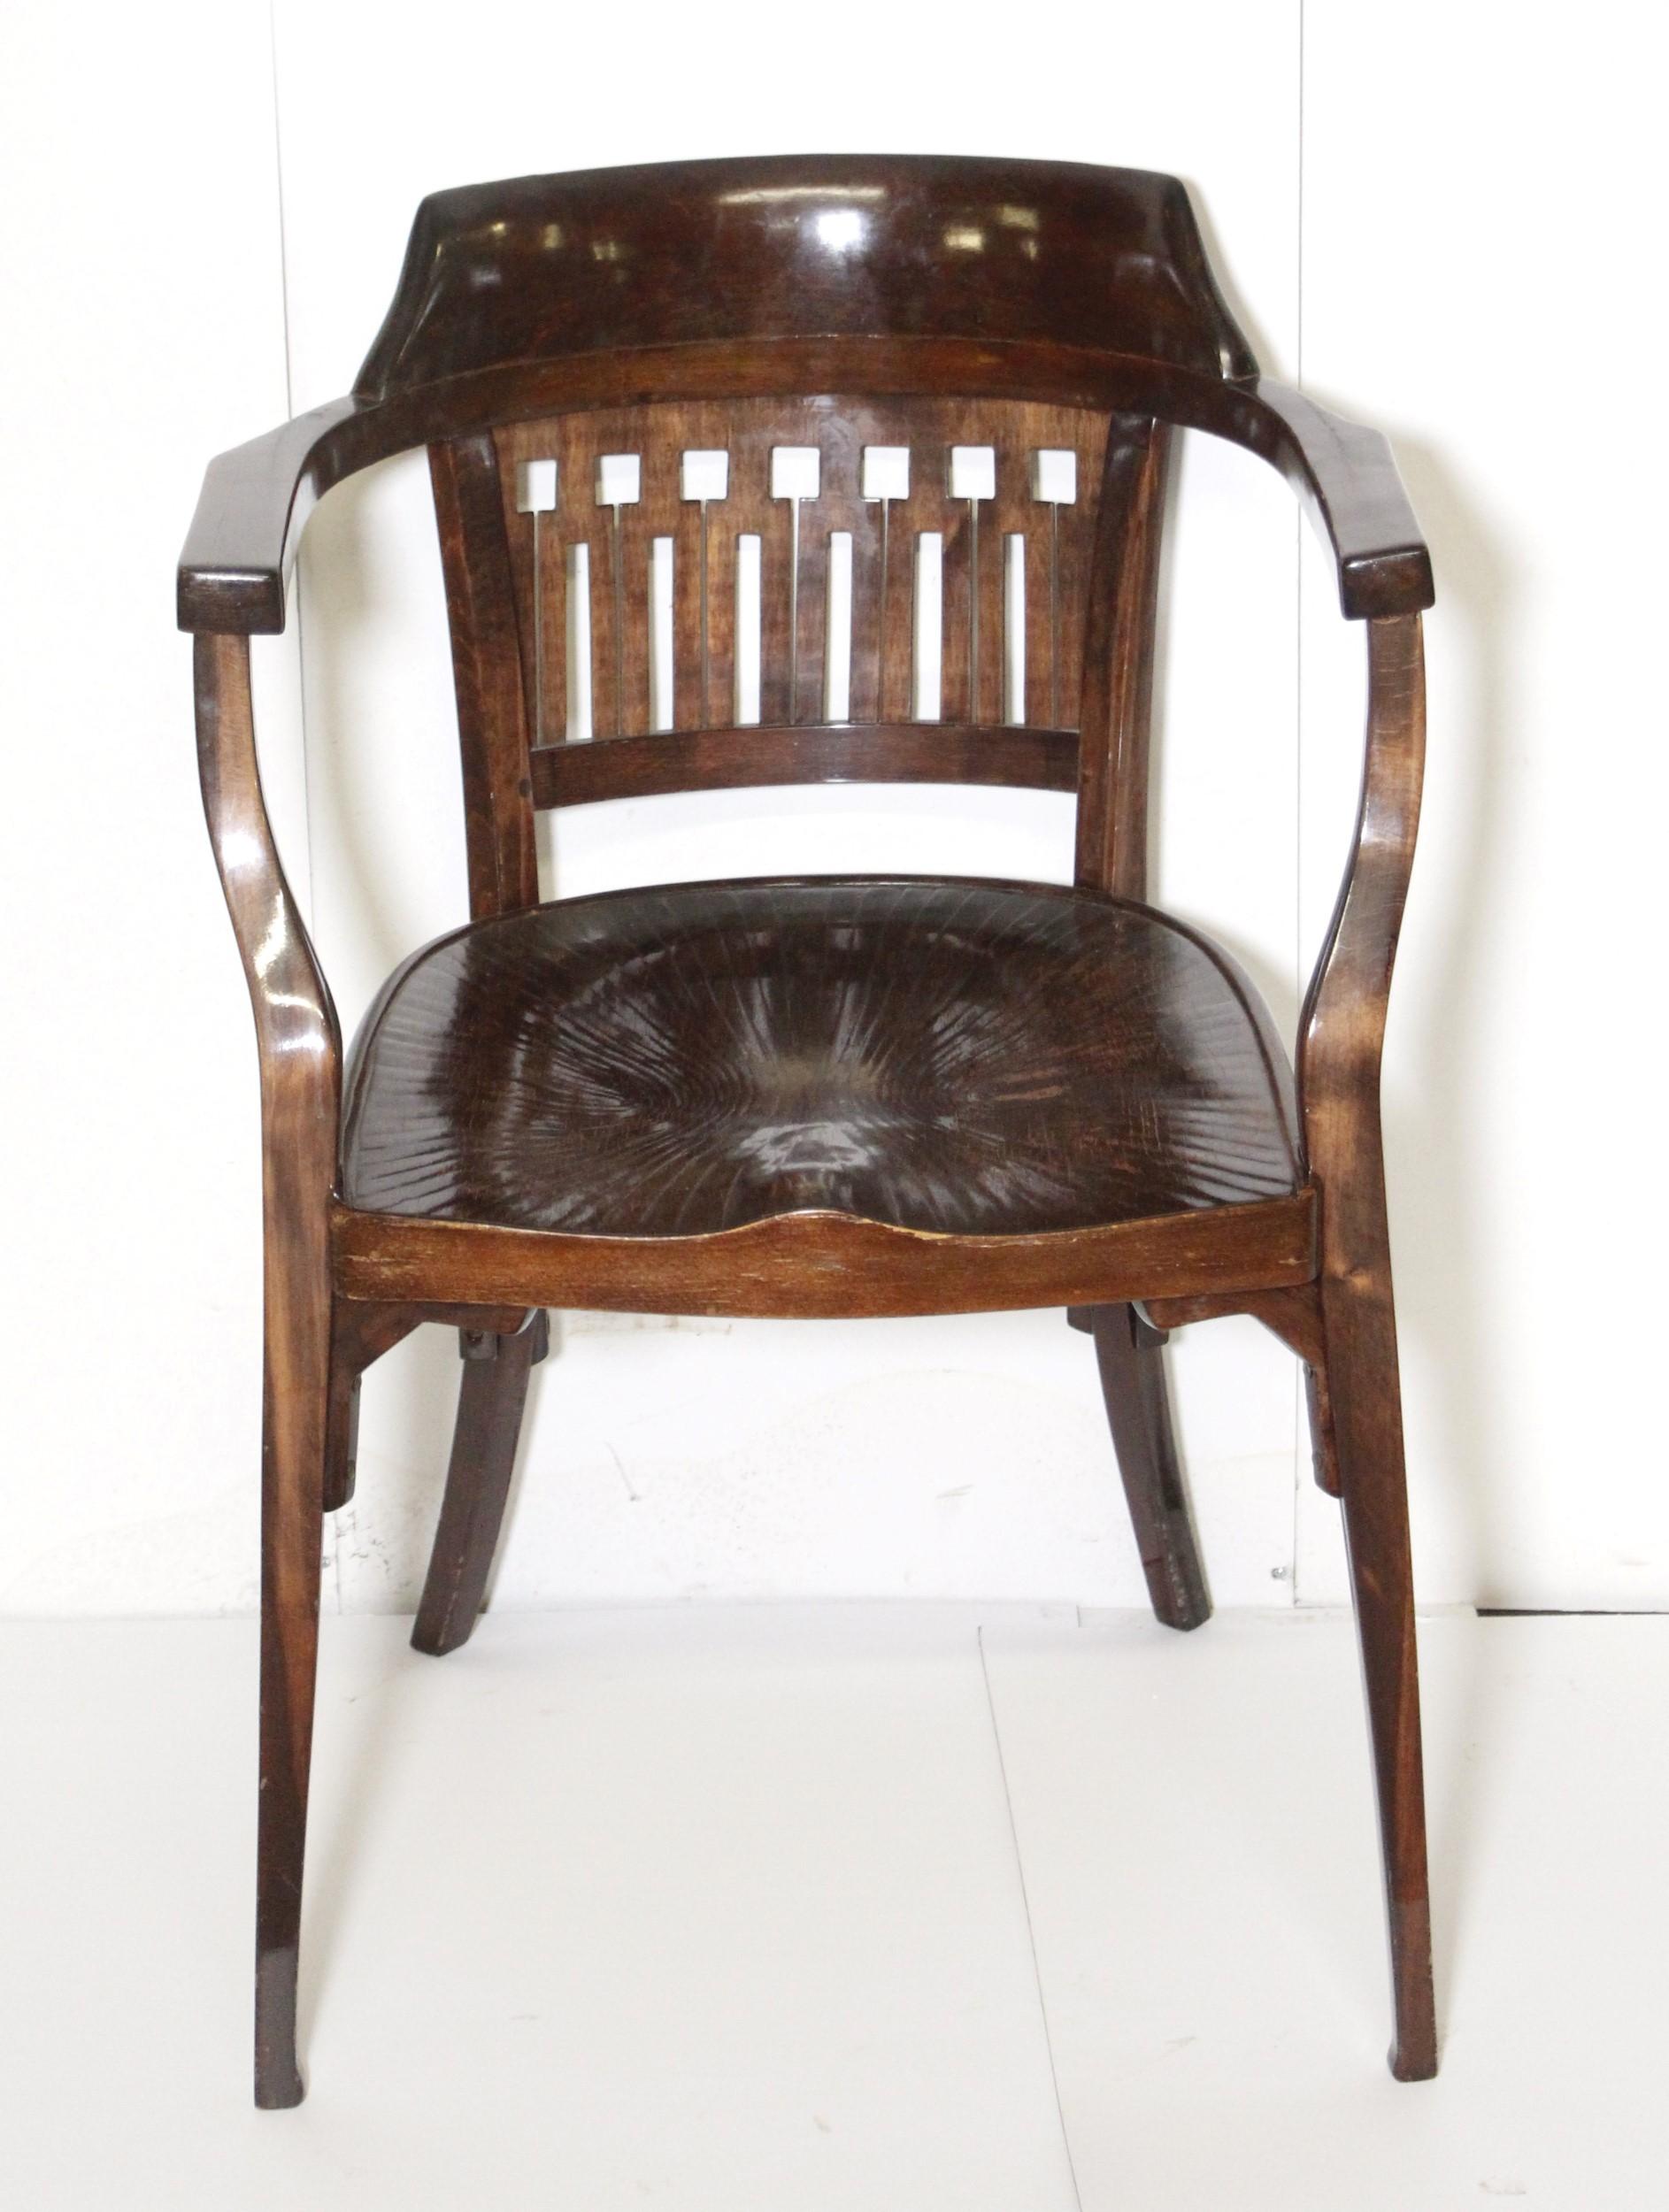 Bauhaus J. J. Kohn Secessionist Bentwood Armchair Designed by Otto Wagner Early 1900s